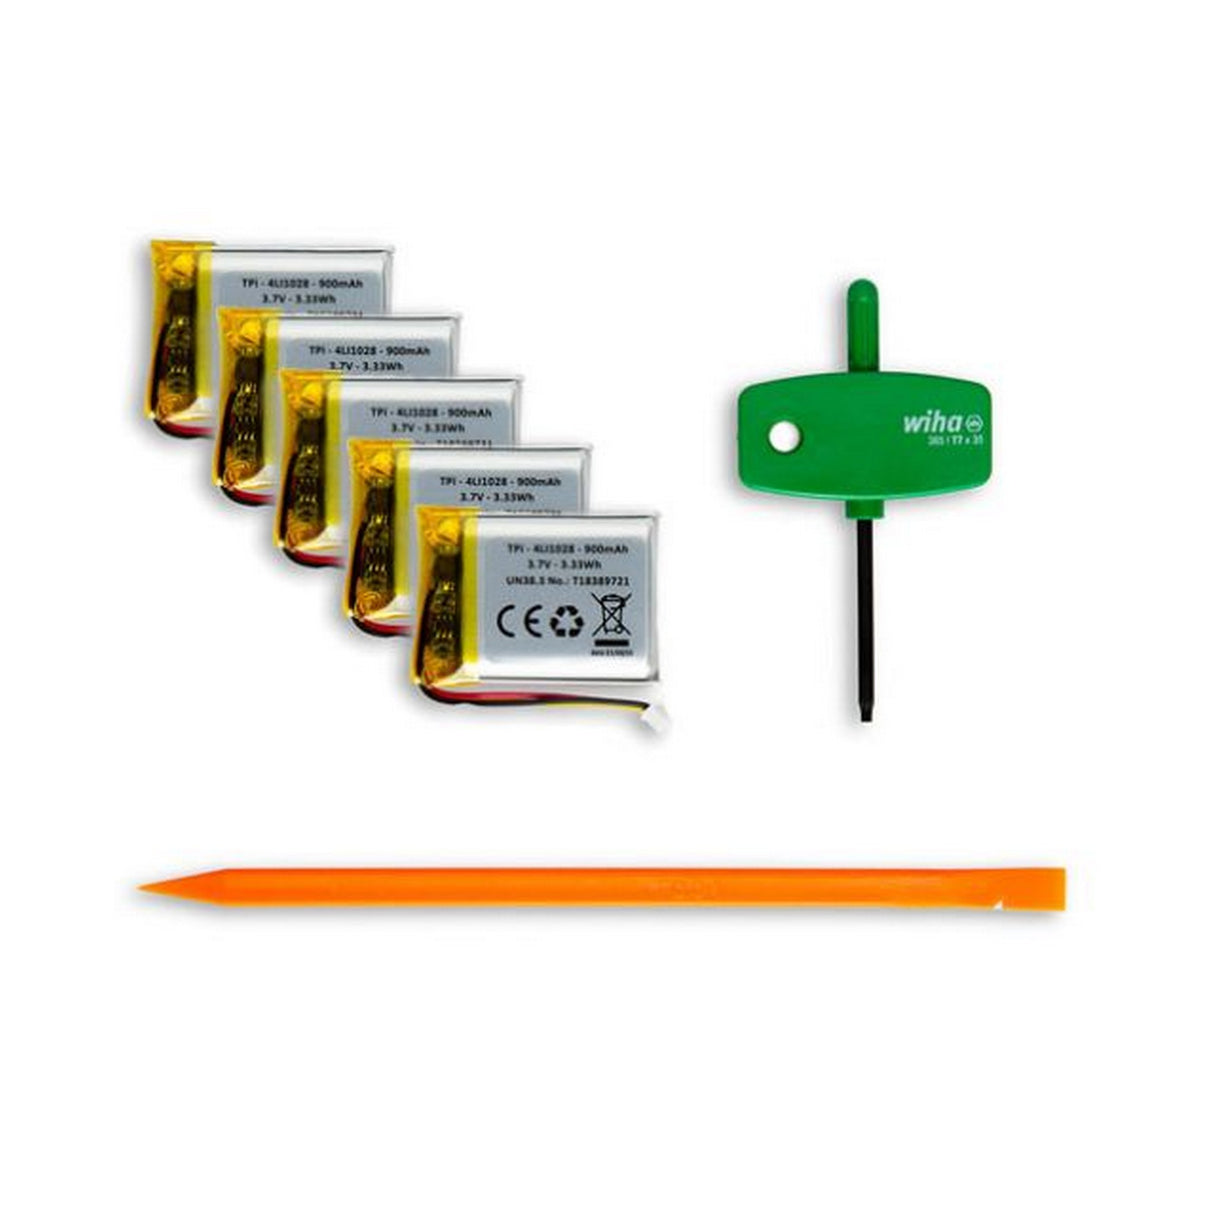 Tentacle Sync Battery Replacement Kit for TRACK E, 5-Pack